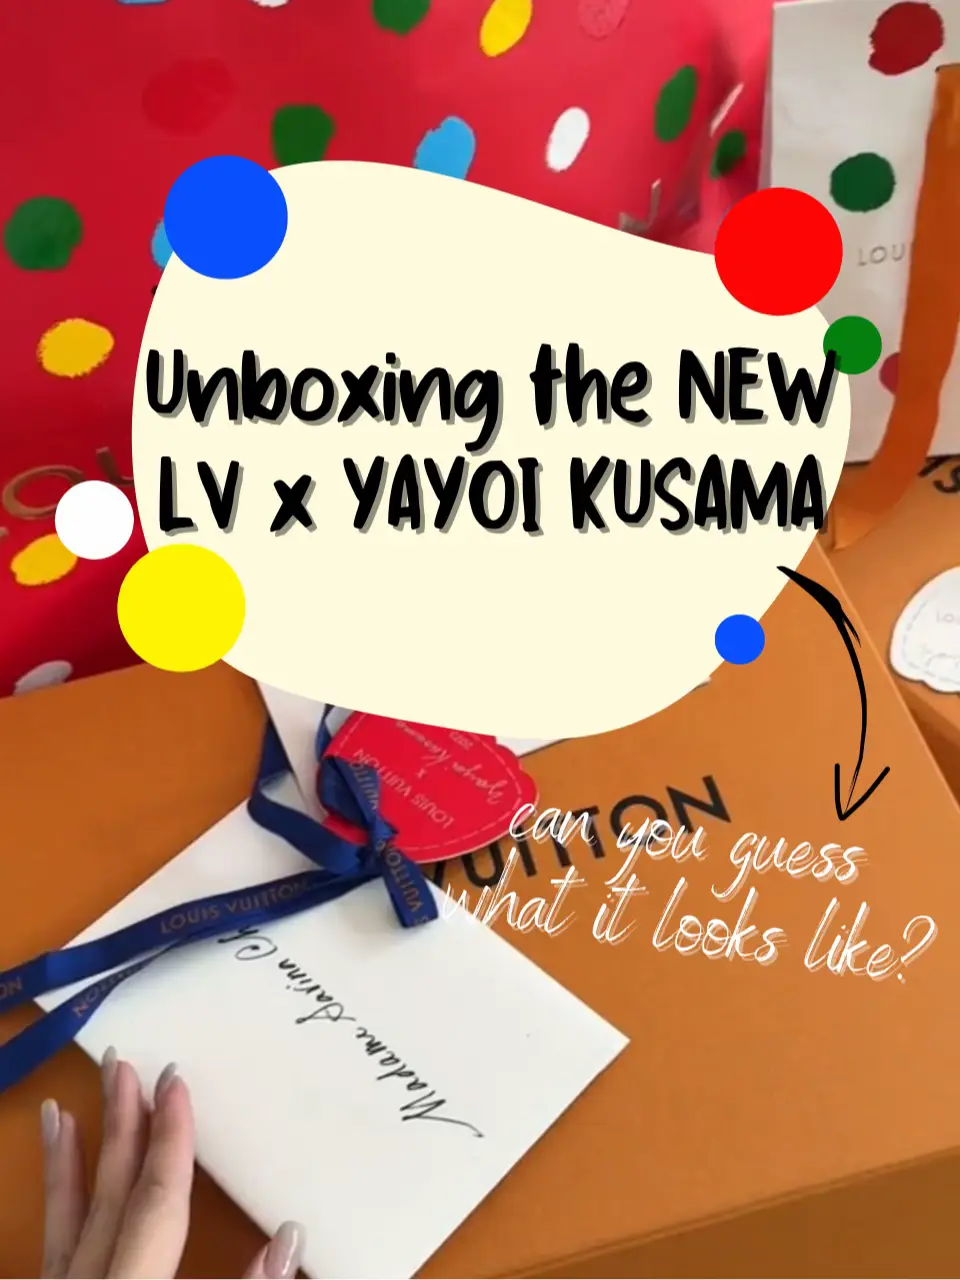 Louis Vuitton Unboxing: Limited Edition Part 2 (Runway Collection